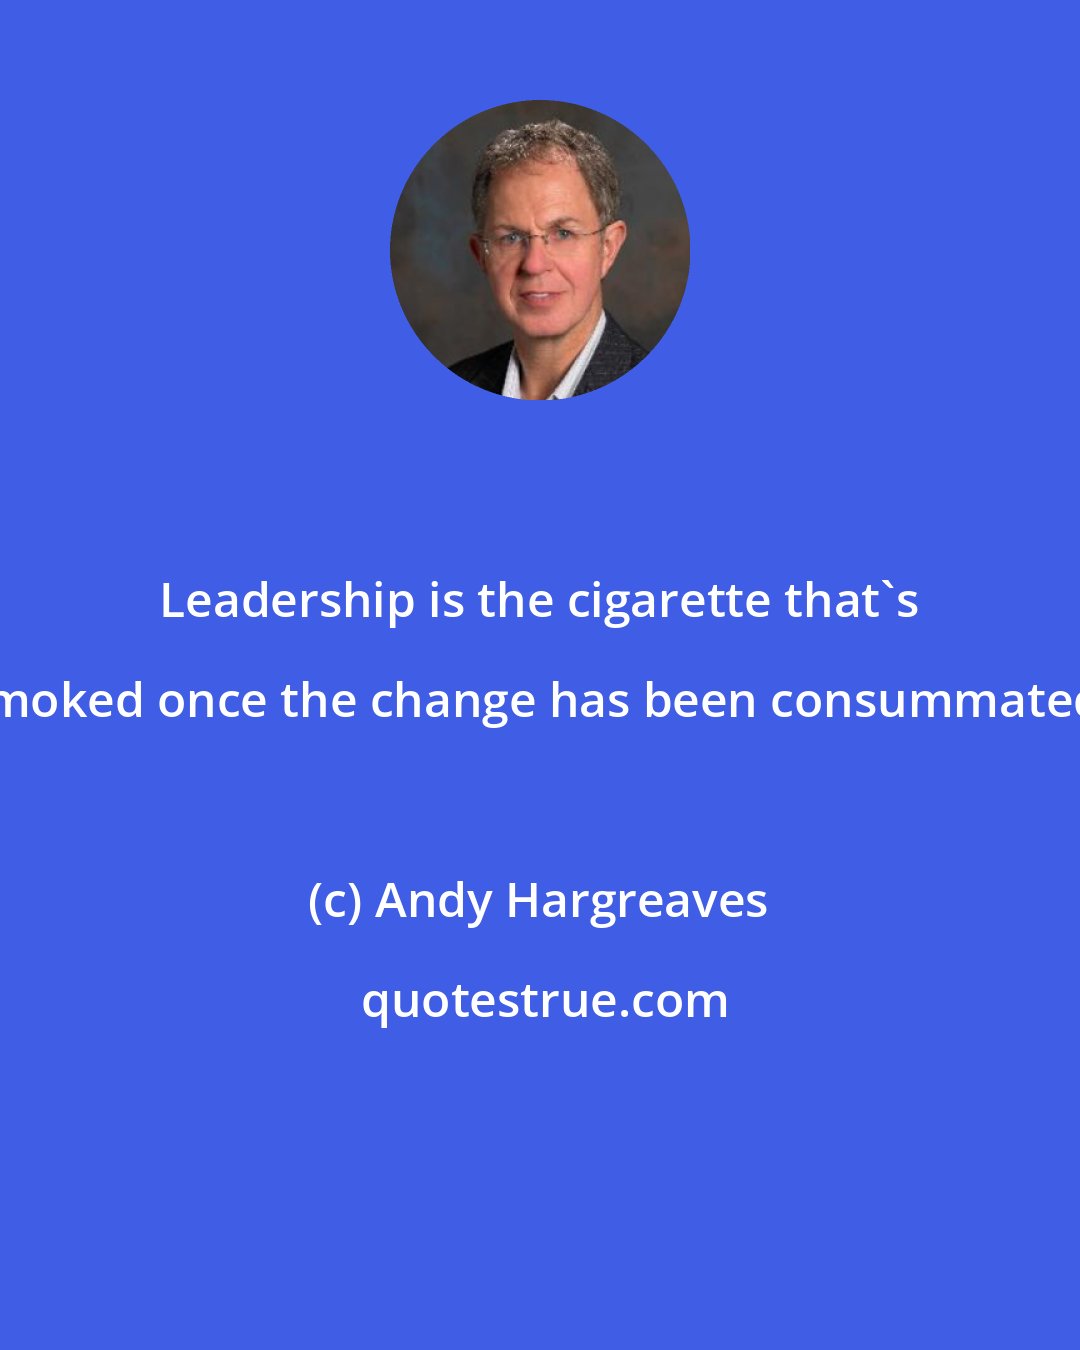 Andy Hargreaves: Leadership is the cigarette that's smoked once the change has been consummated.